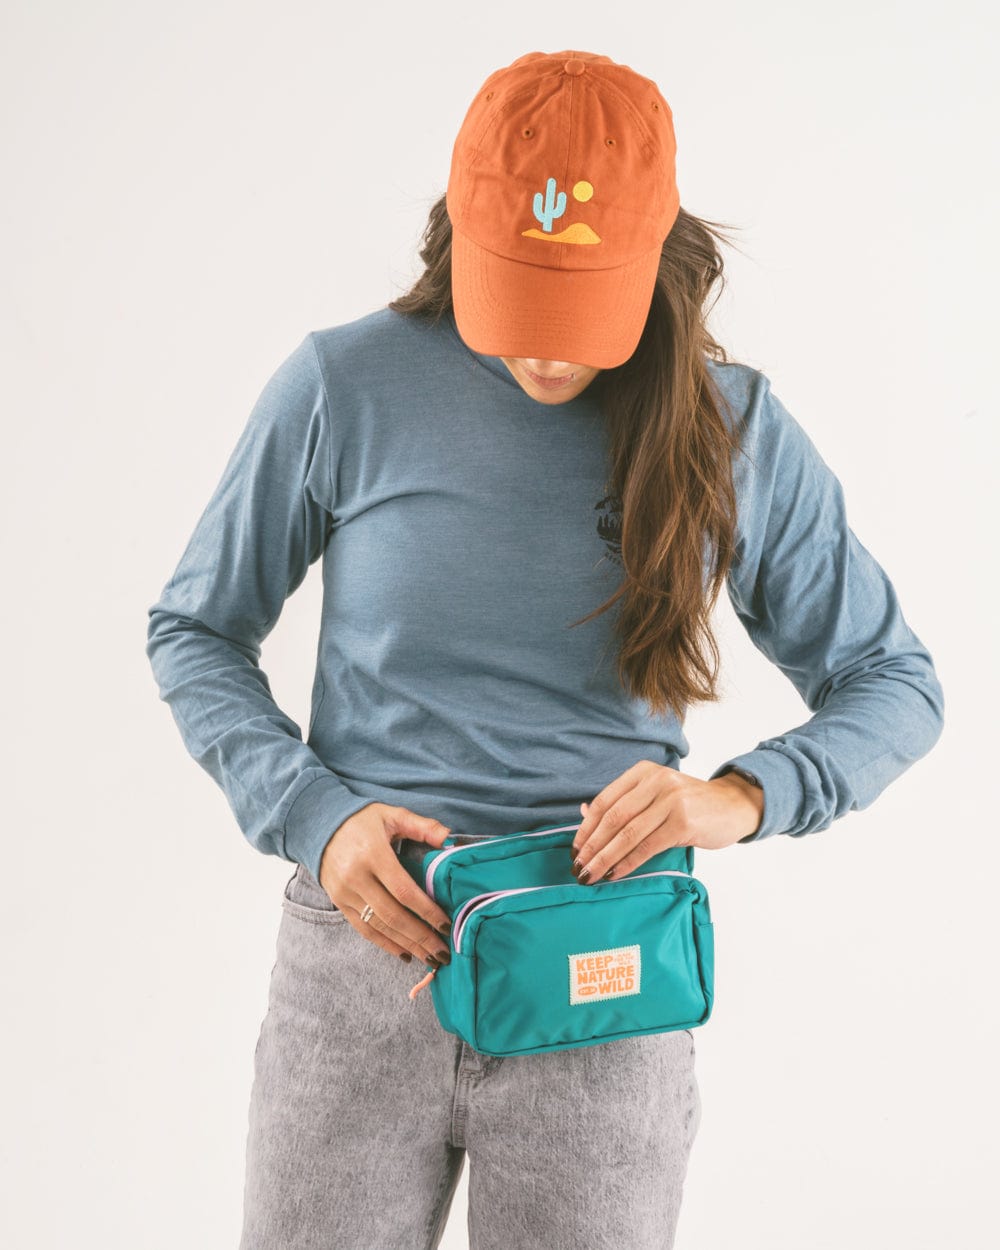 Keep Nature Wild Fanny Pack Adventure Fanny Pack | Teal/Lavender